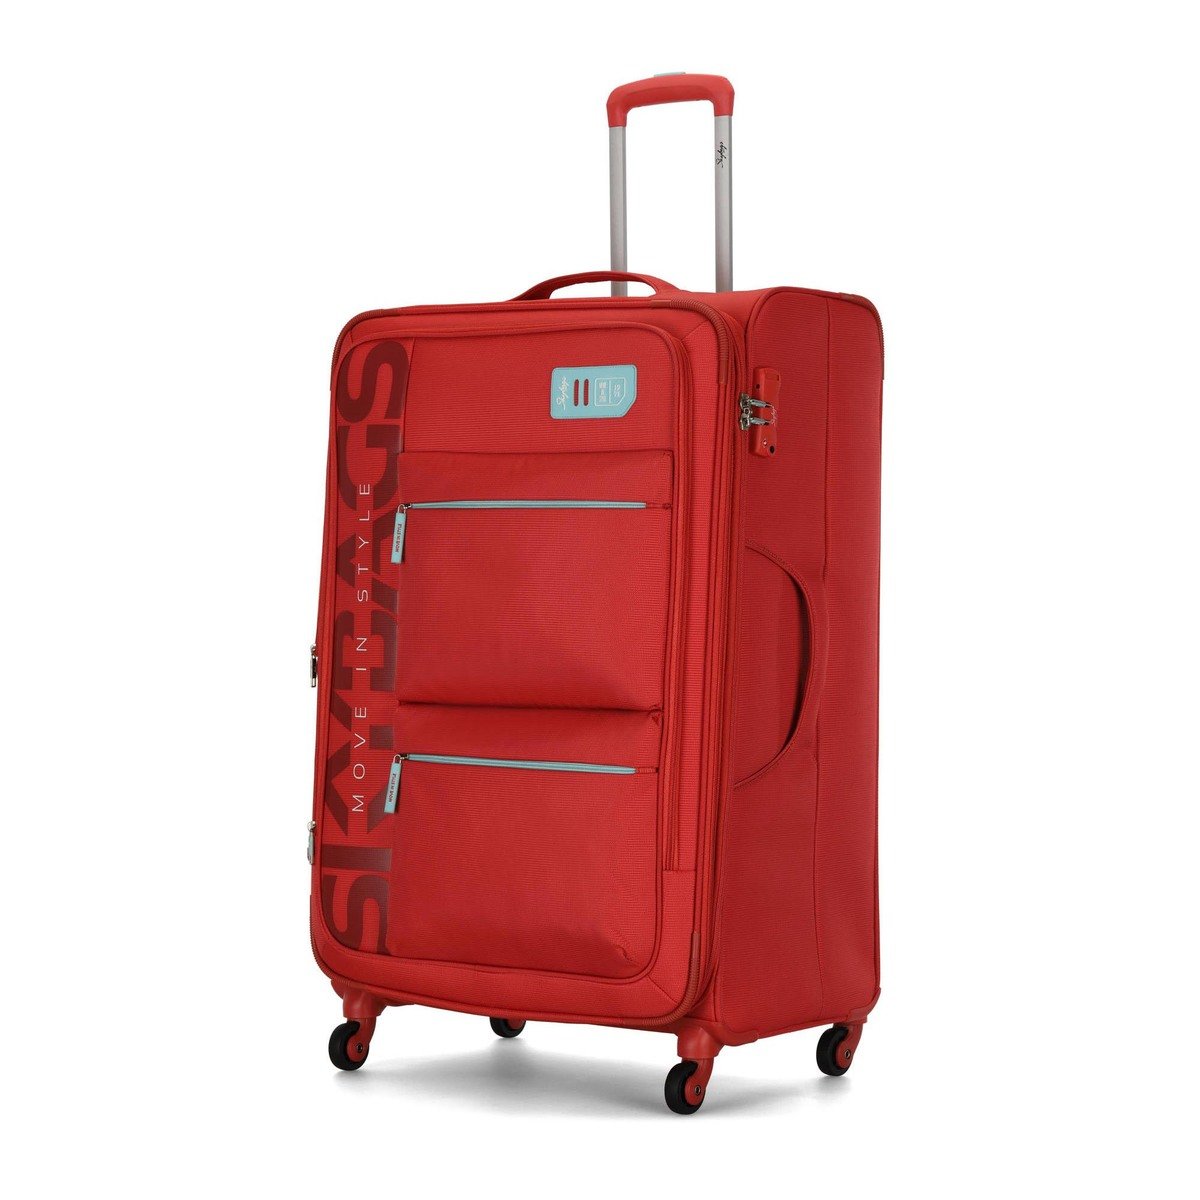 Skybags Vanguard 4 Wheel Soft Trolley, 71 cm, Coral